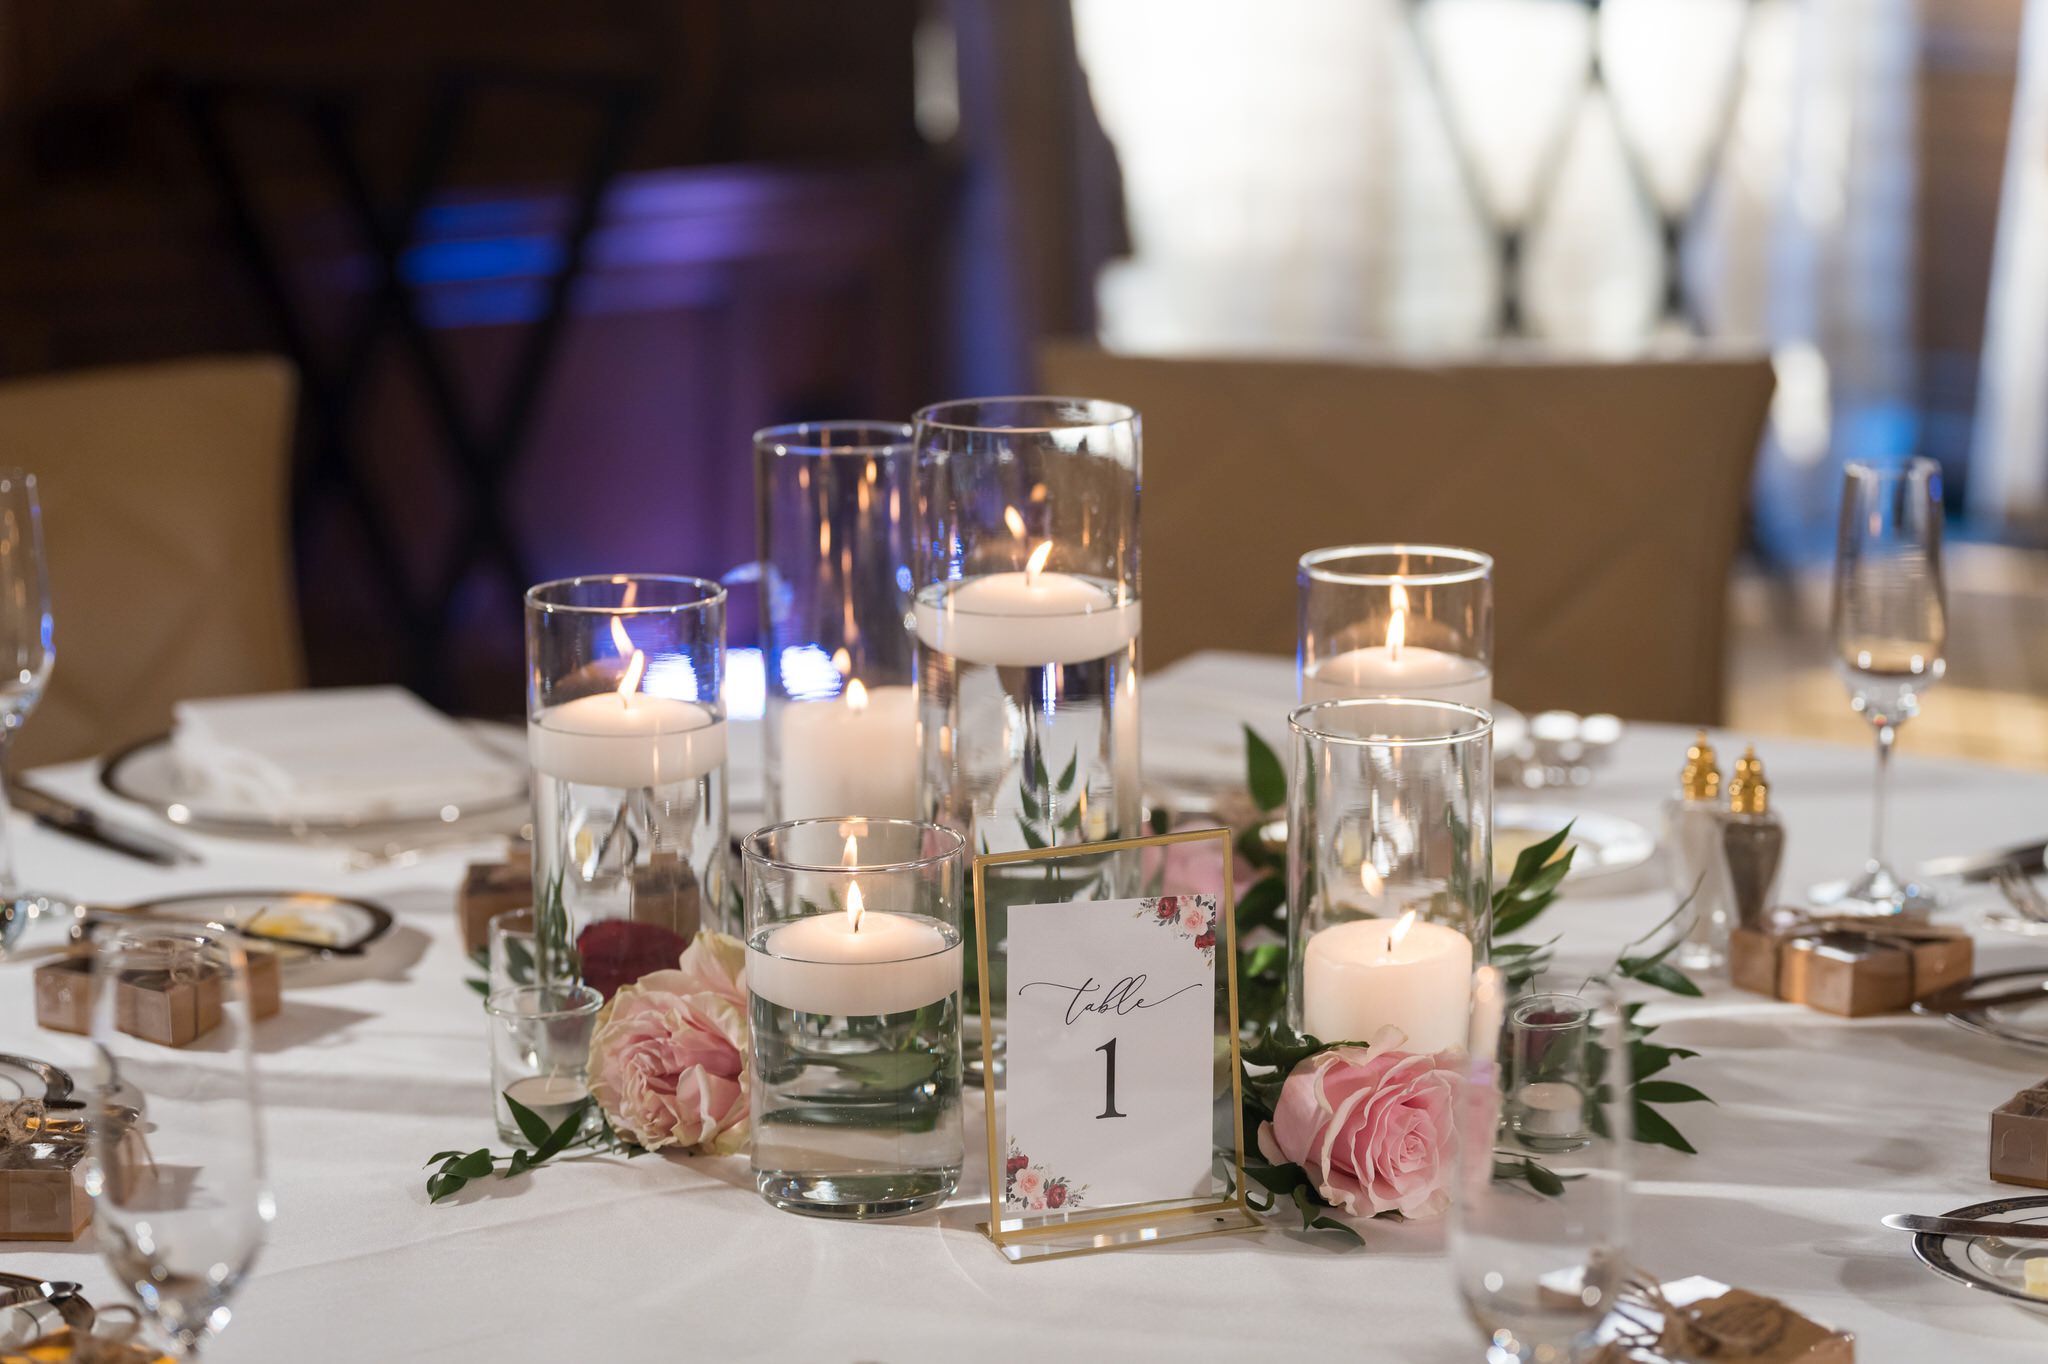 Centerpieces by Emerald City Design at a Detroit Athletic Club wedding.  